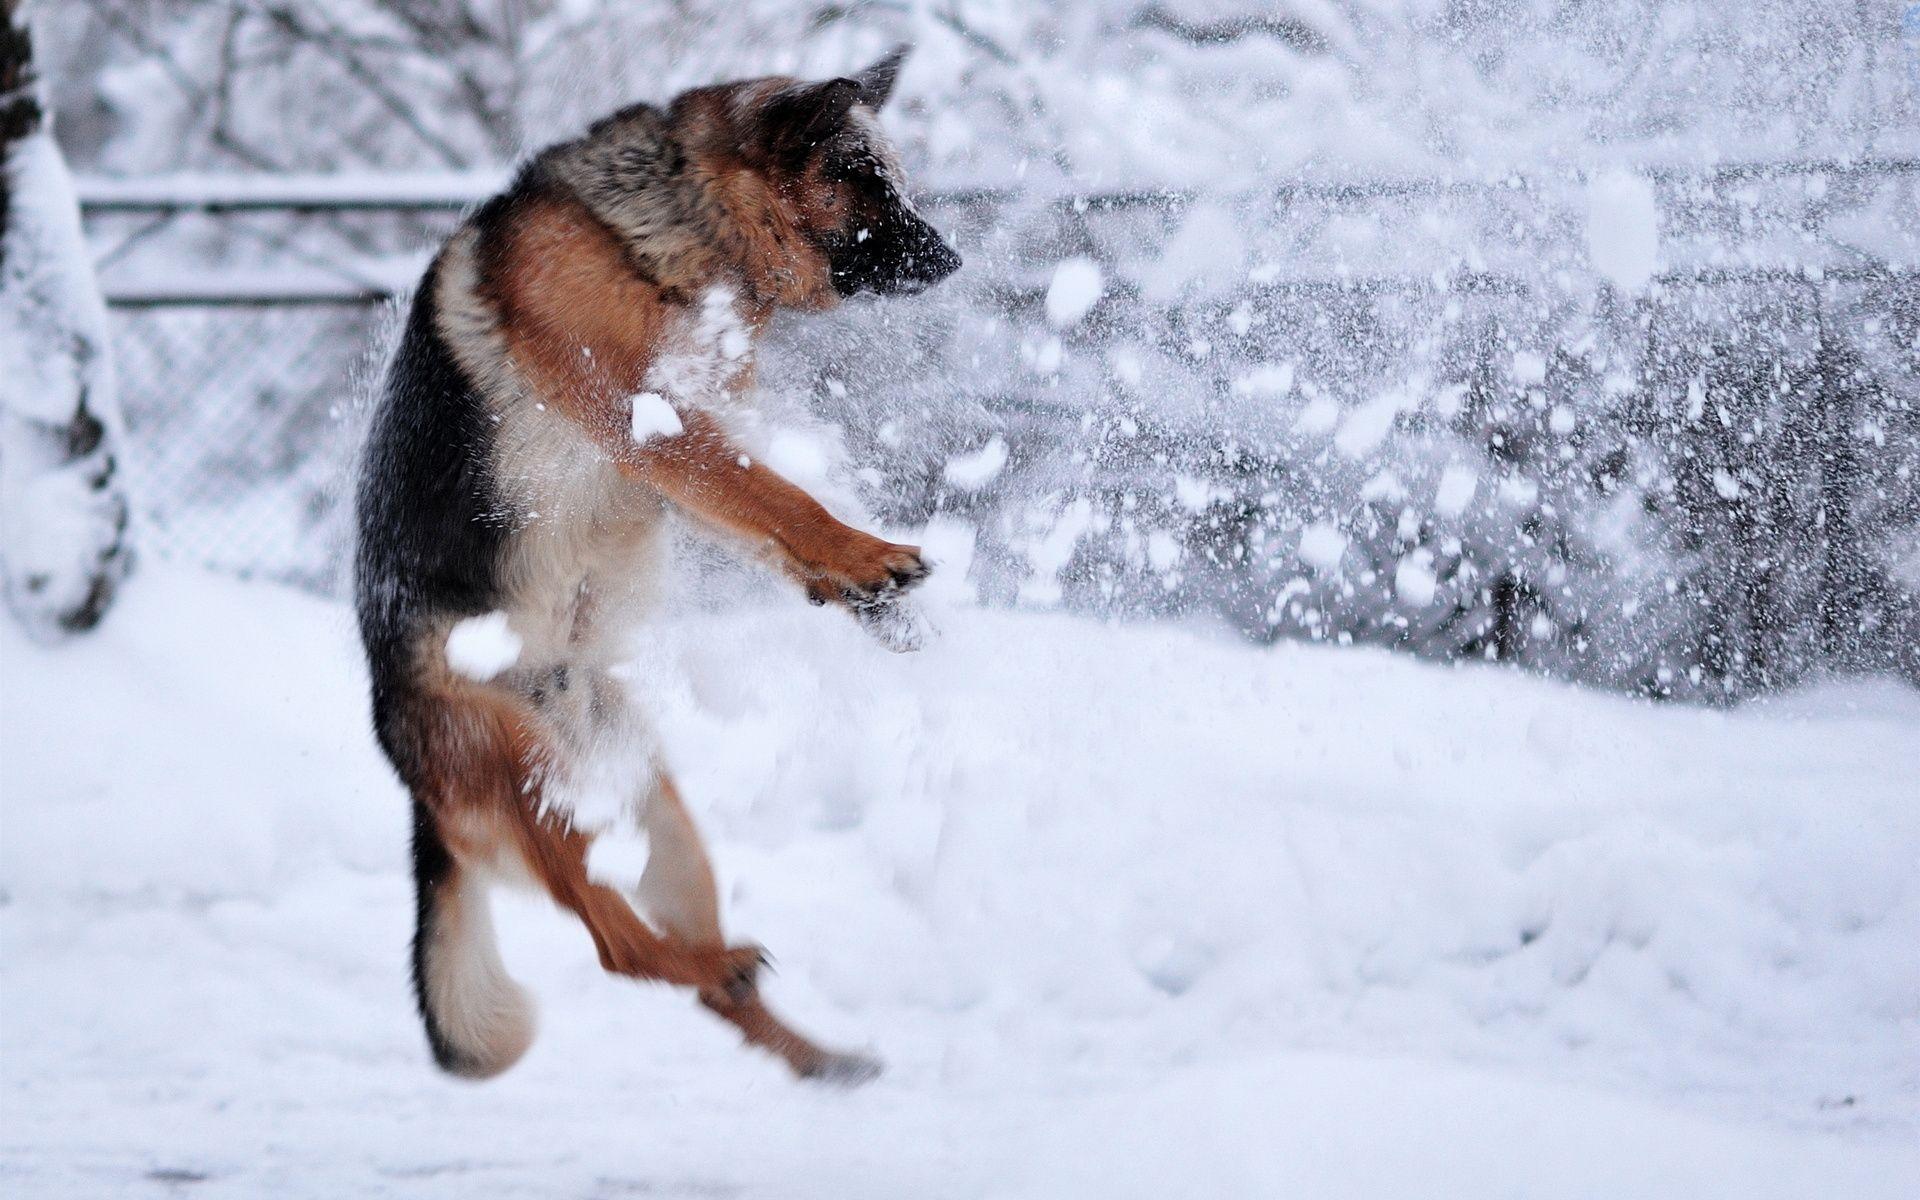 dogs, mood, winter, picture, free image, snow, snowflakes, cool